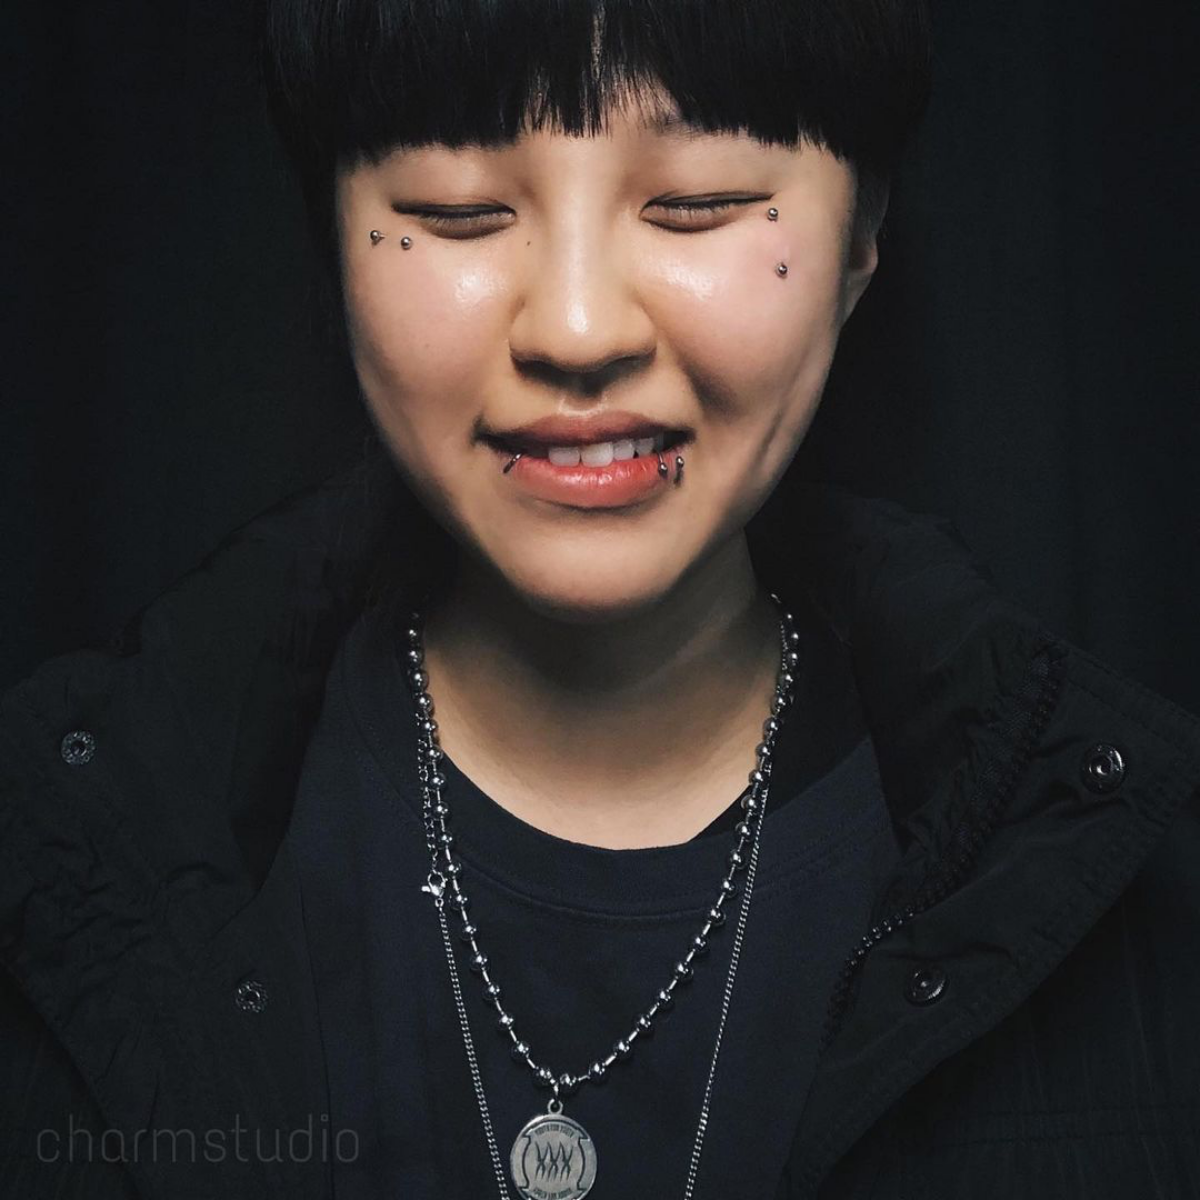 12 asian person with face piercings